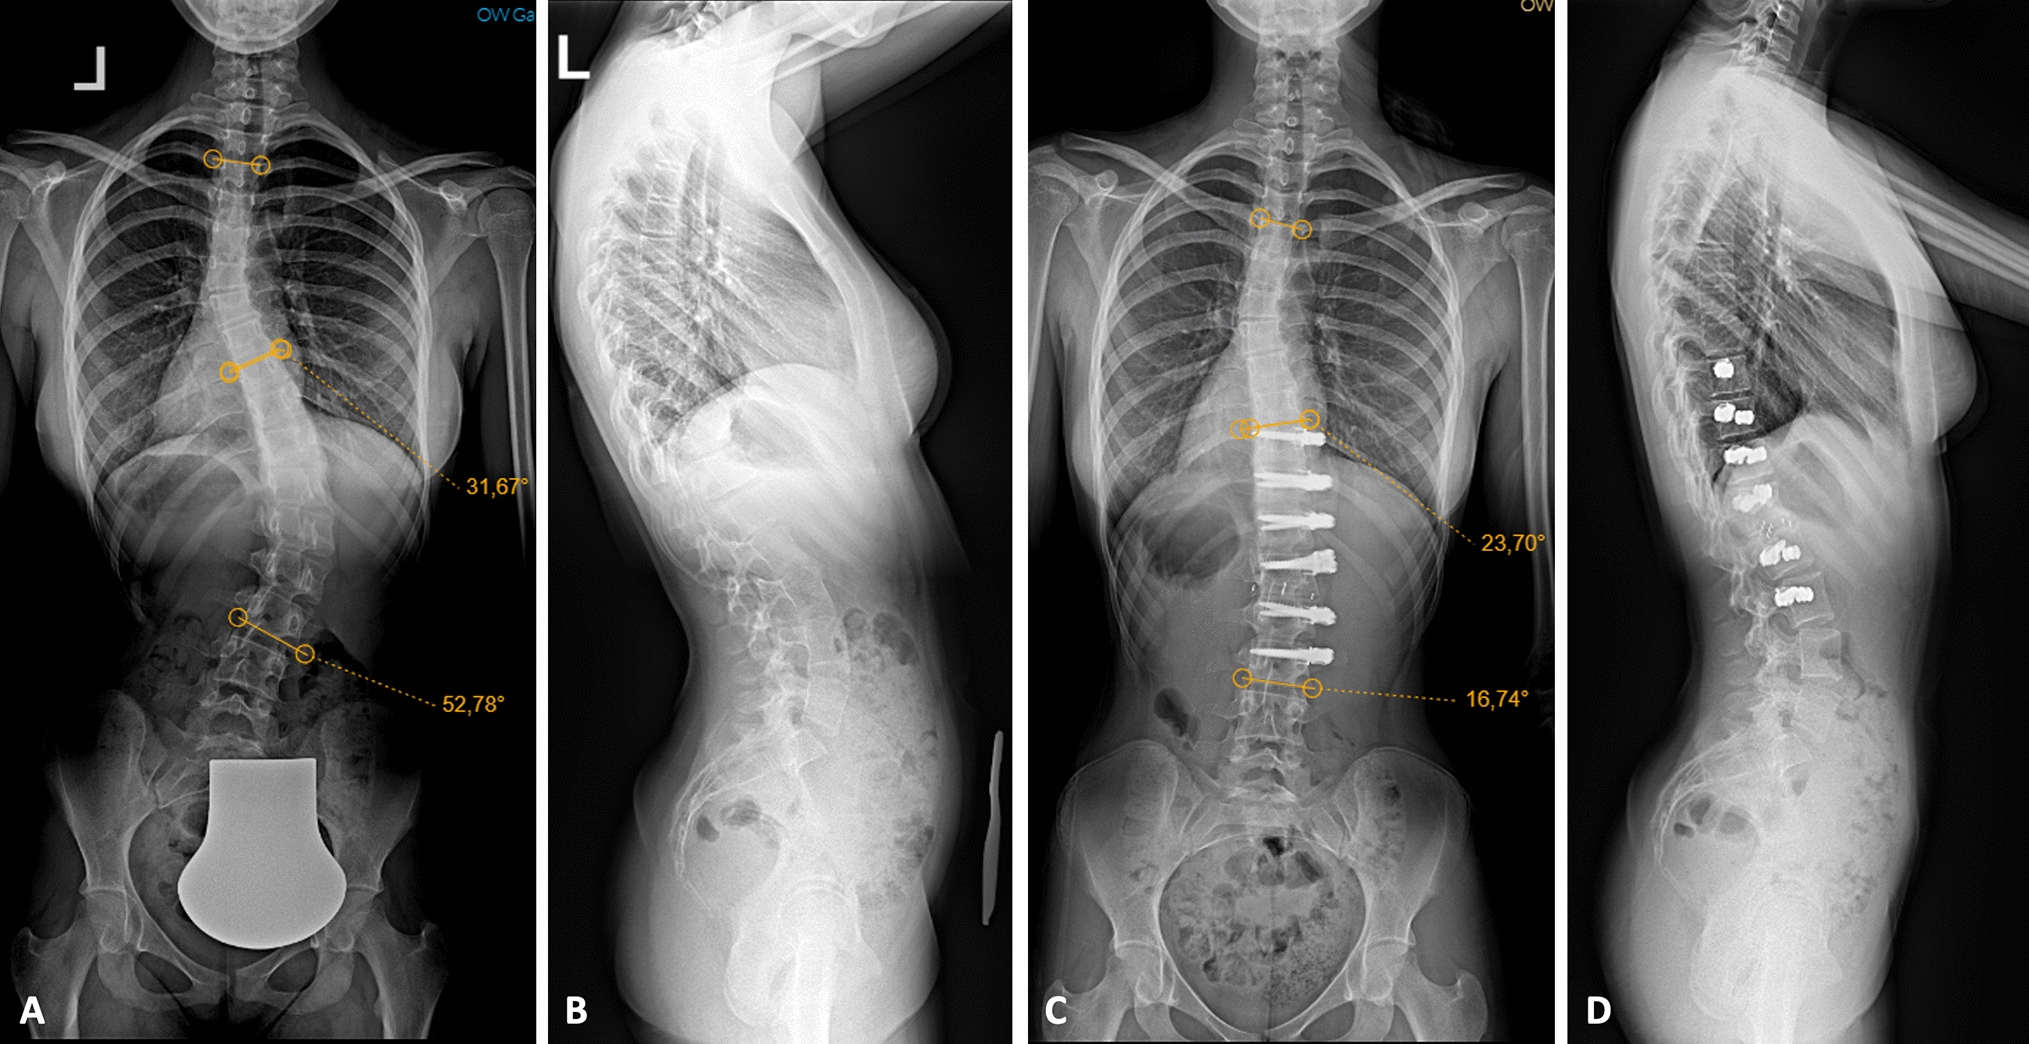 Early-term outcome of apical fusion with vertebral body tethering for thoracolumbar curves in adolescent idiopathic scoliosis: a preliminary study